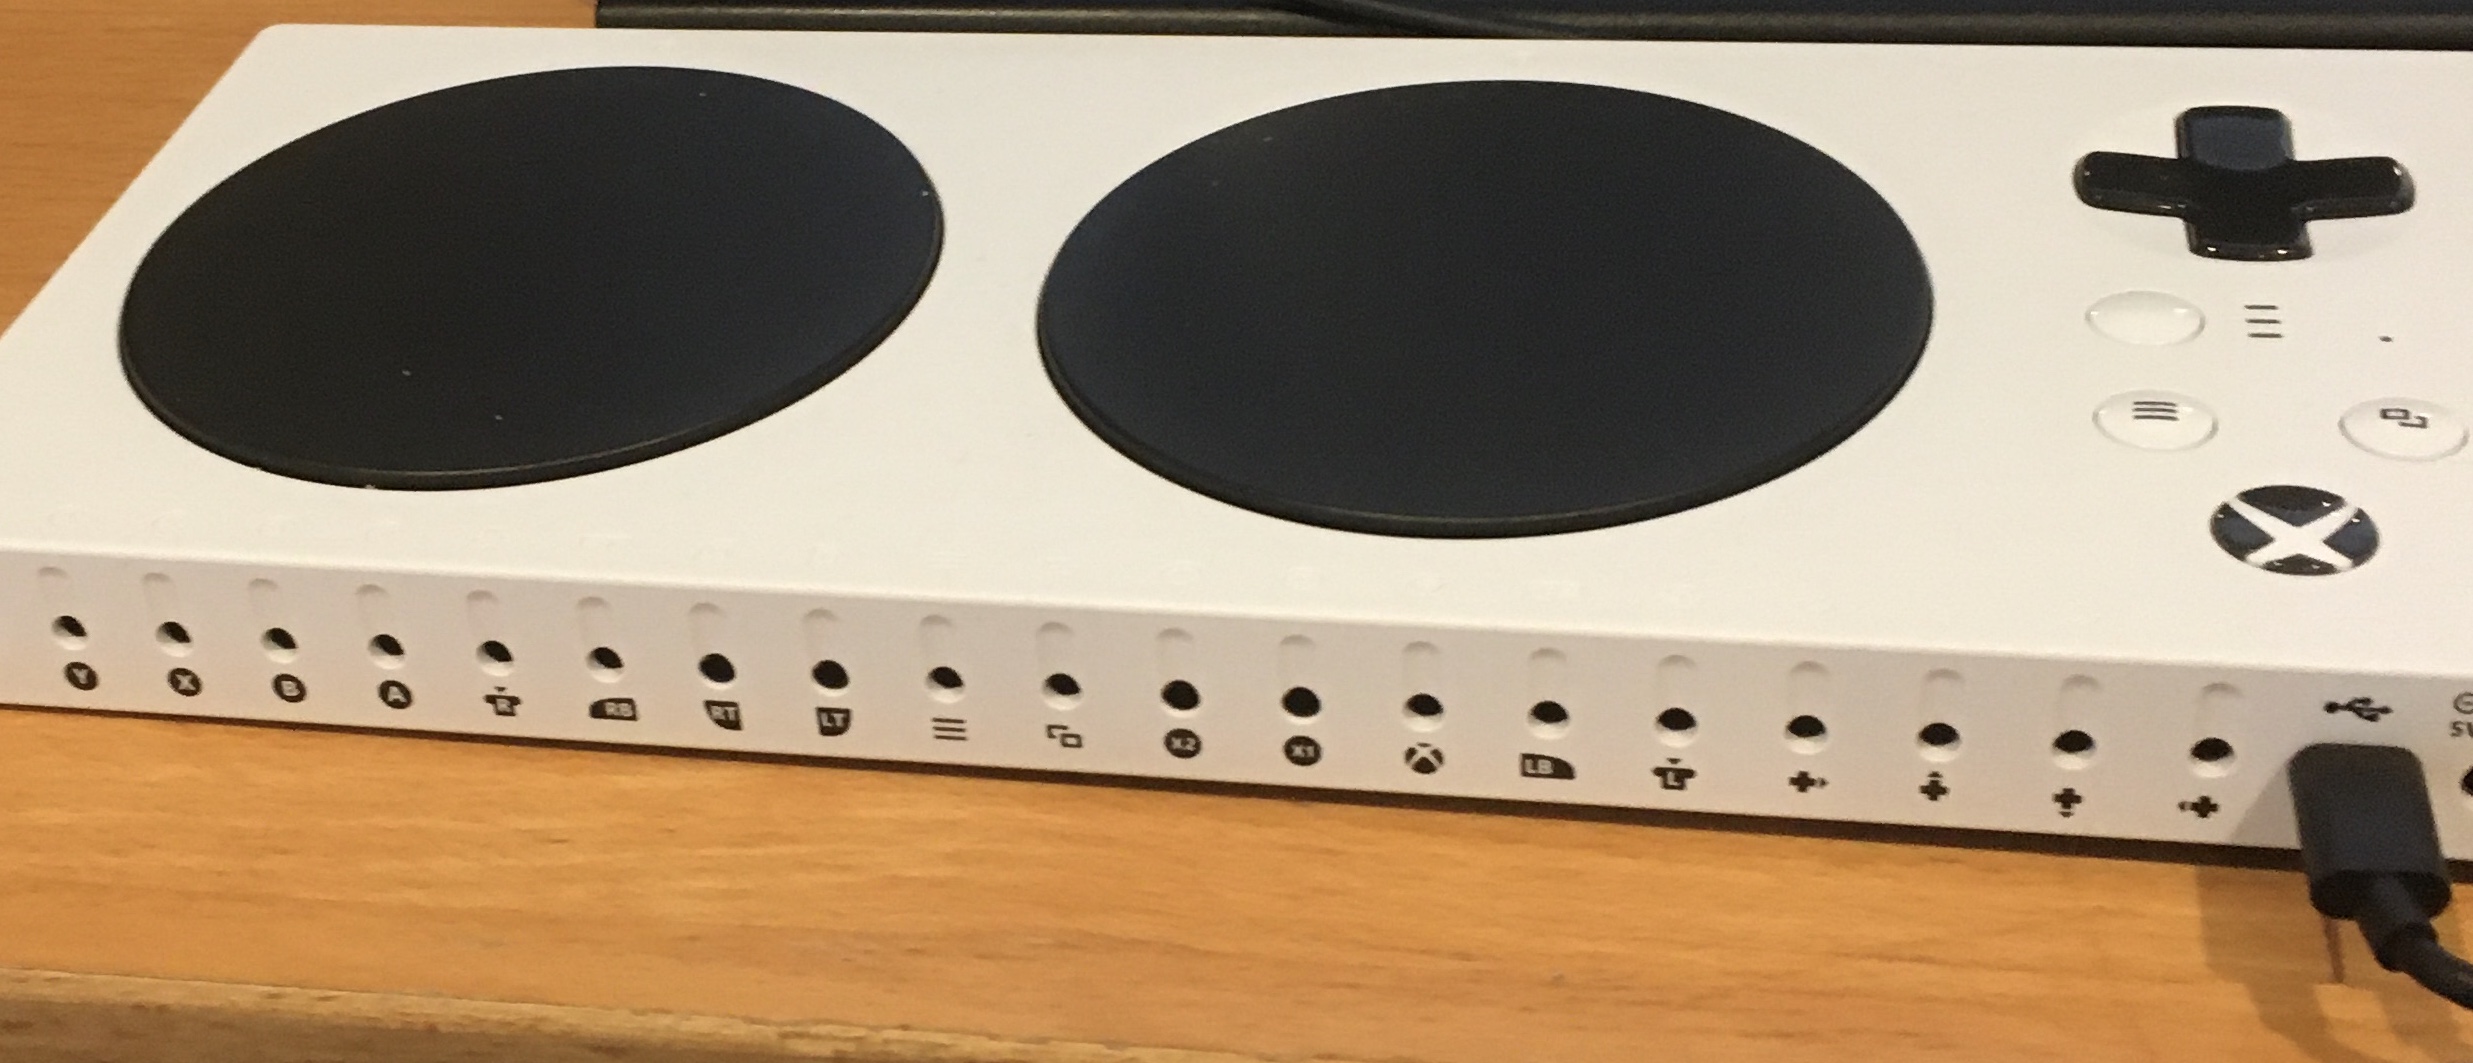 Back of Sam Graves' Xbox Adaptive Controller. There are about 20 ports for plugging in external devices.